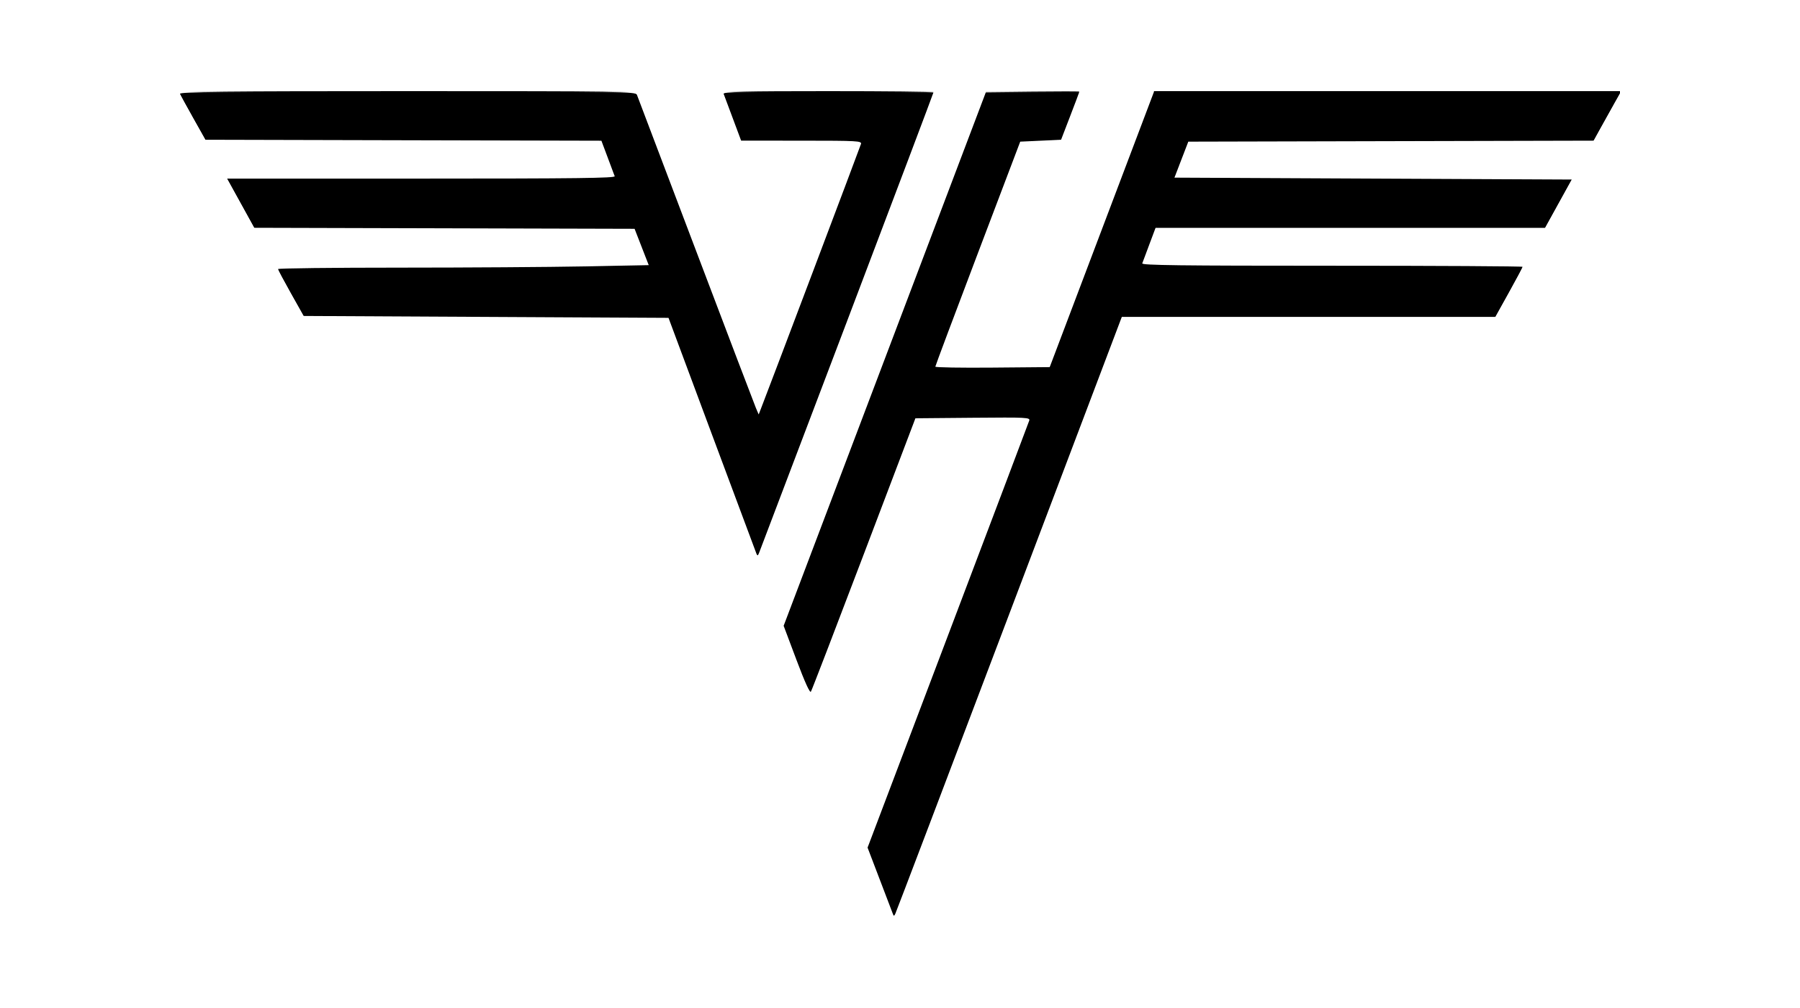 Van Halen Logo - Van Halen Logo, Van Halen Symbol, Meaning, History and Evolution